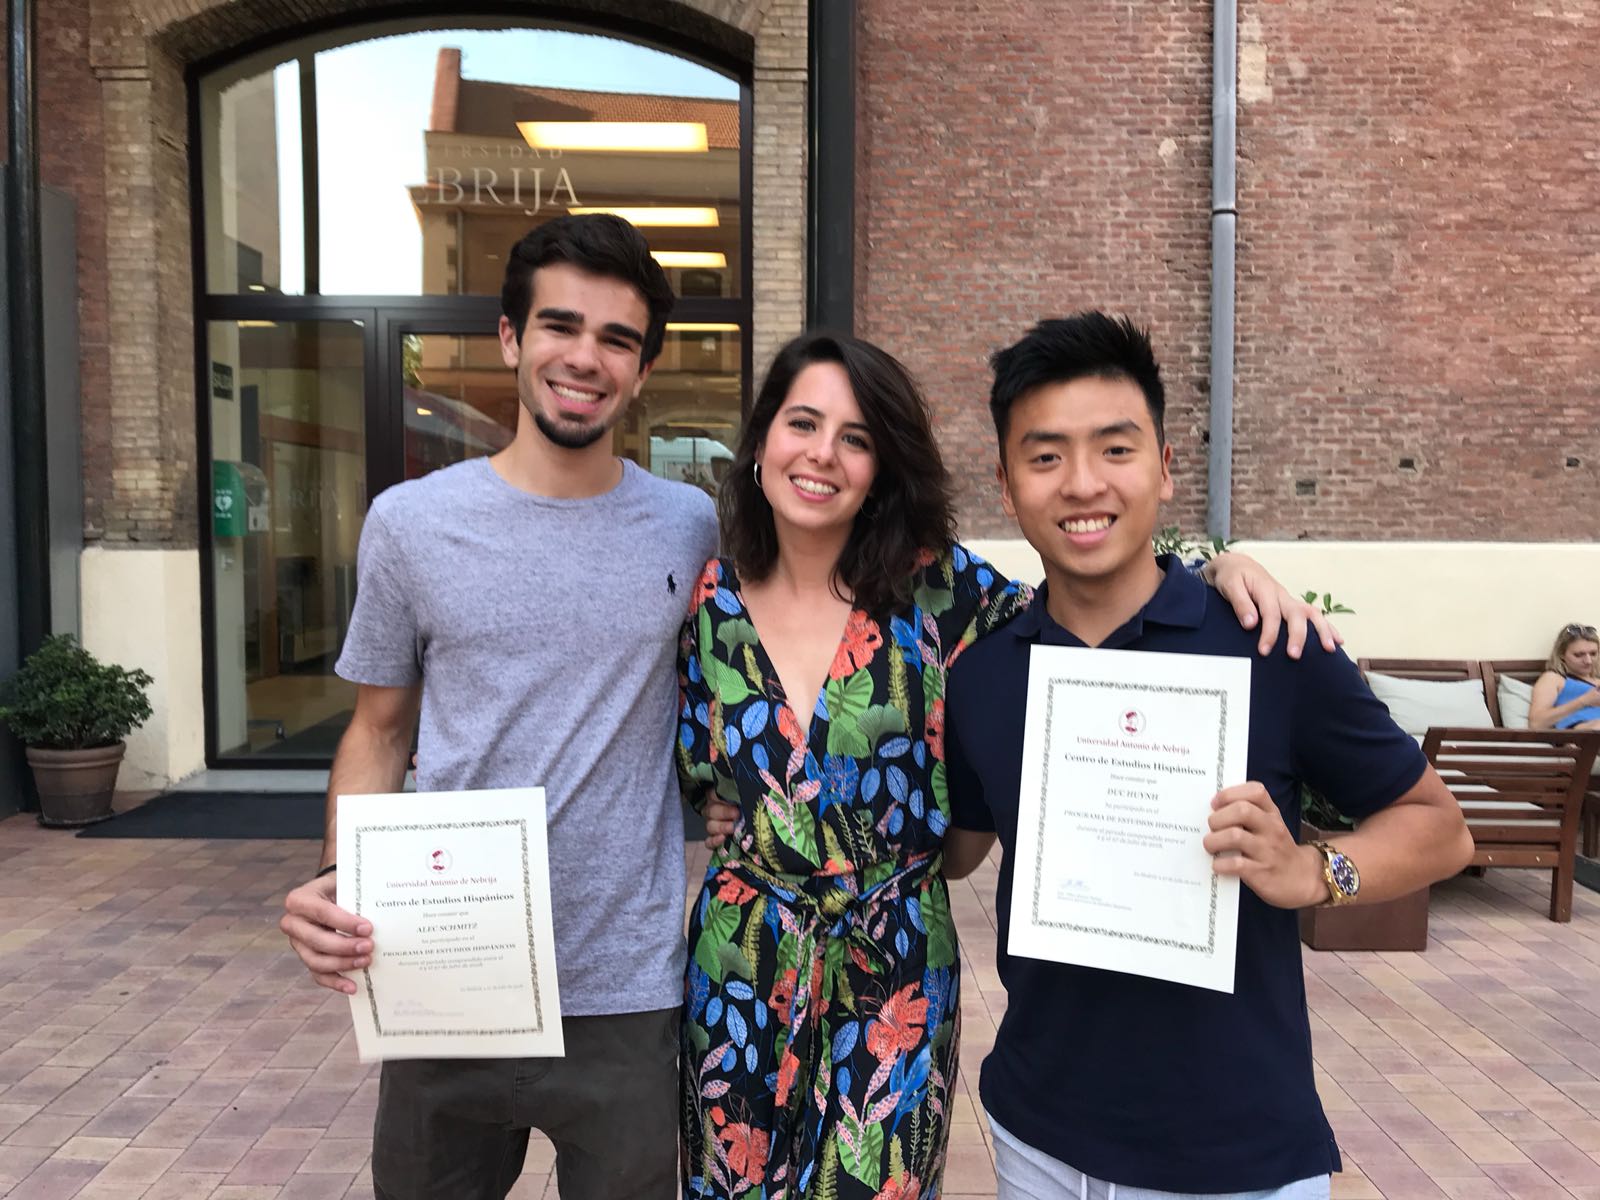 Three people standing outside, two holding up pieces of paper